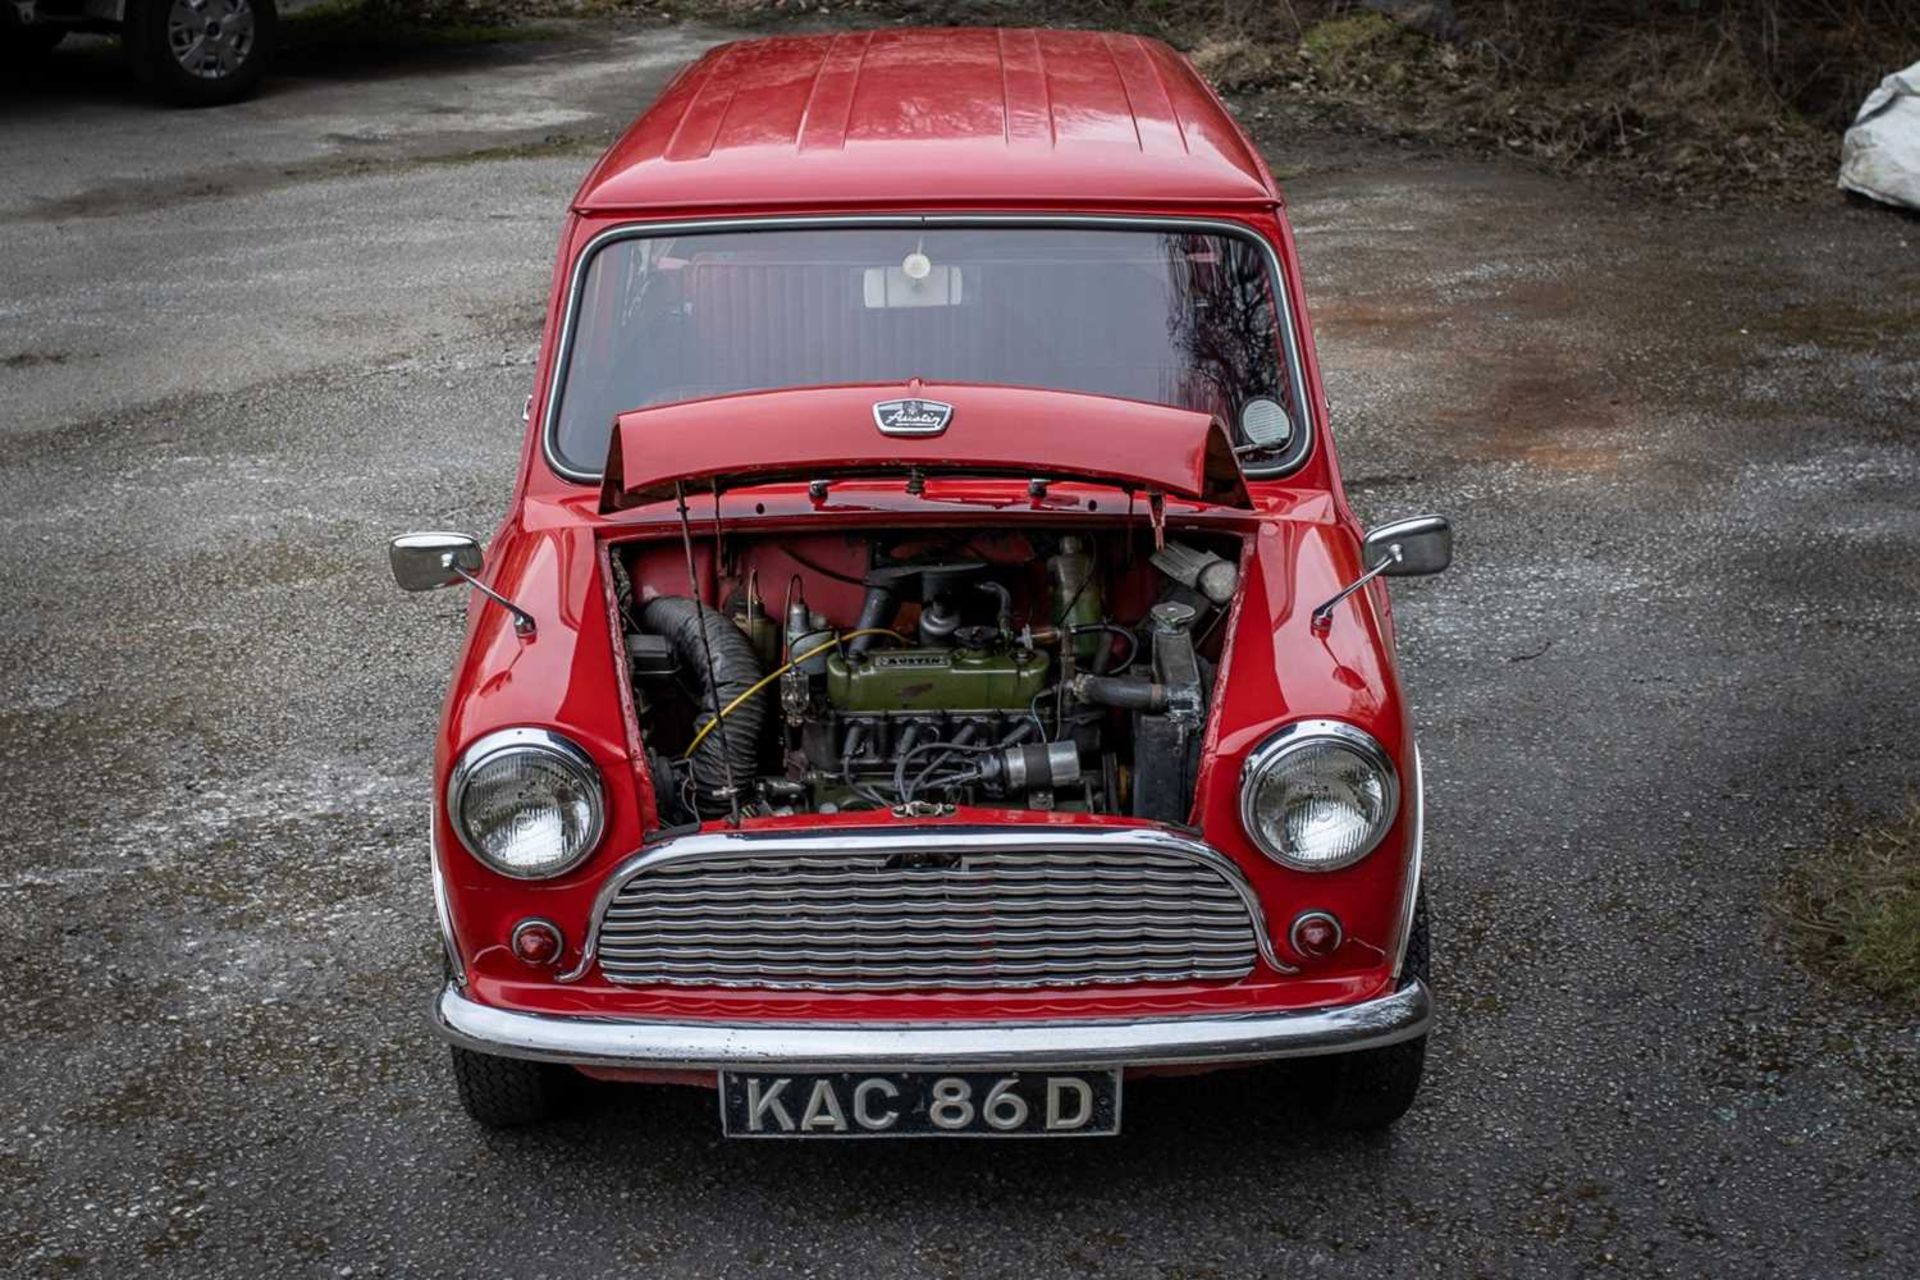 1966 Austin Mini Countryman Part of museum display in the Isle of Man for five years - Image 11 of 68